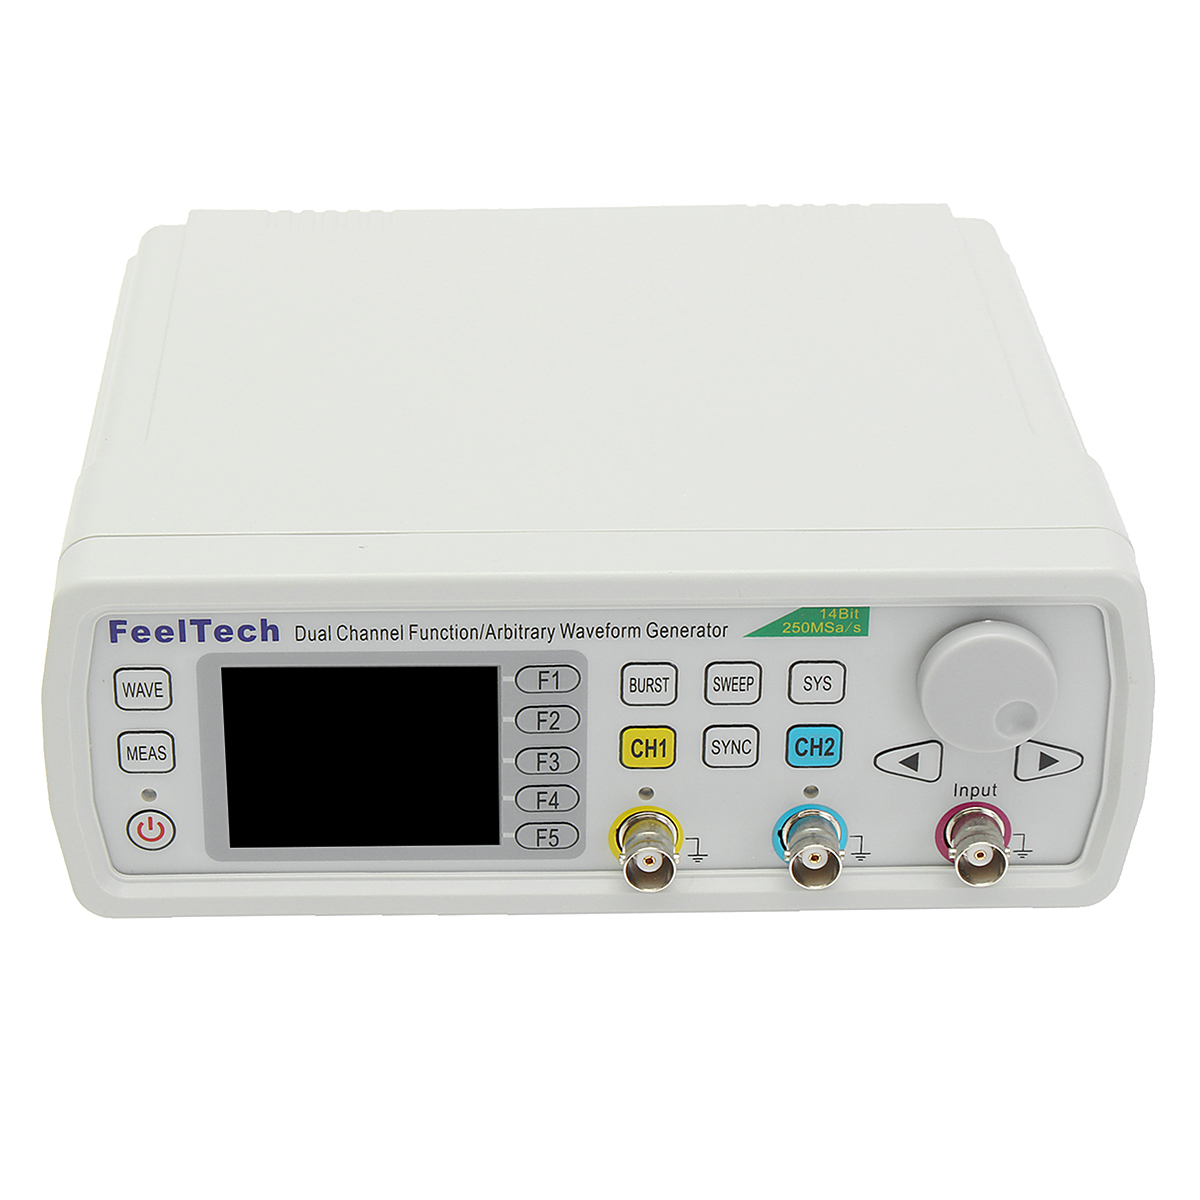 FY6600 Digital 12-60MHz Dual Channel DDS Function Arbitrary Waveform Signal Generator Frequency Meter 39